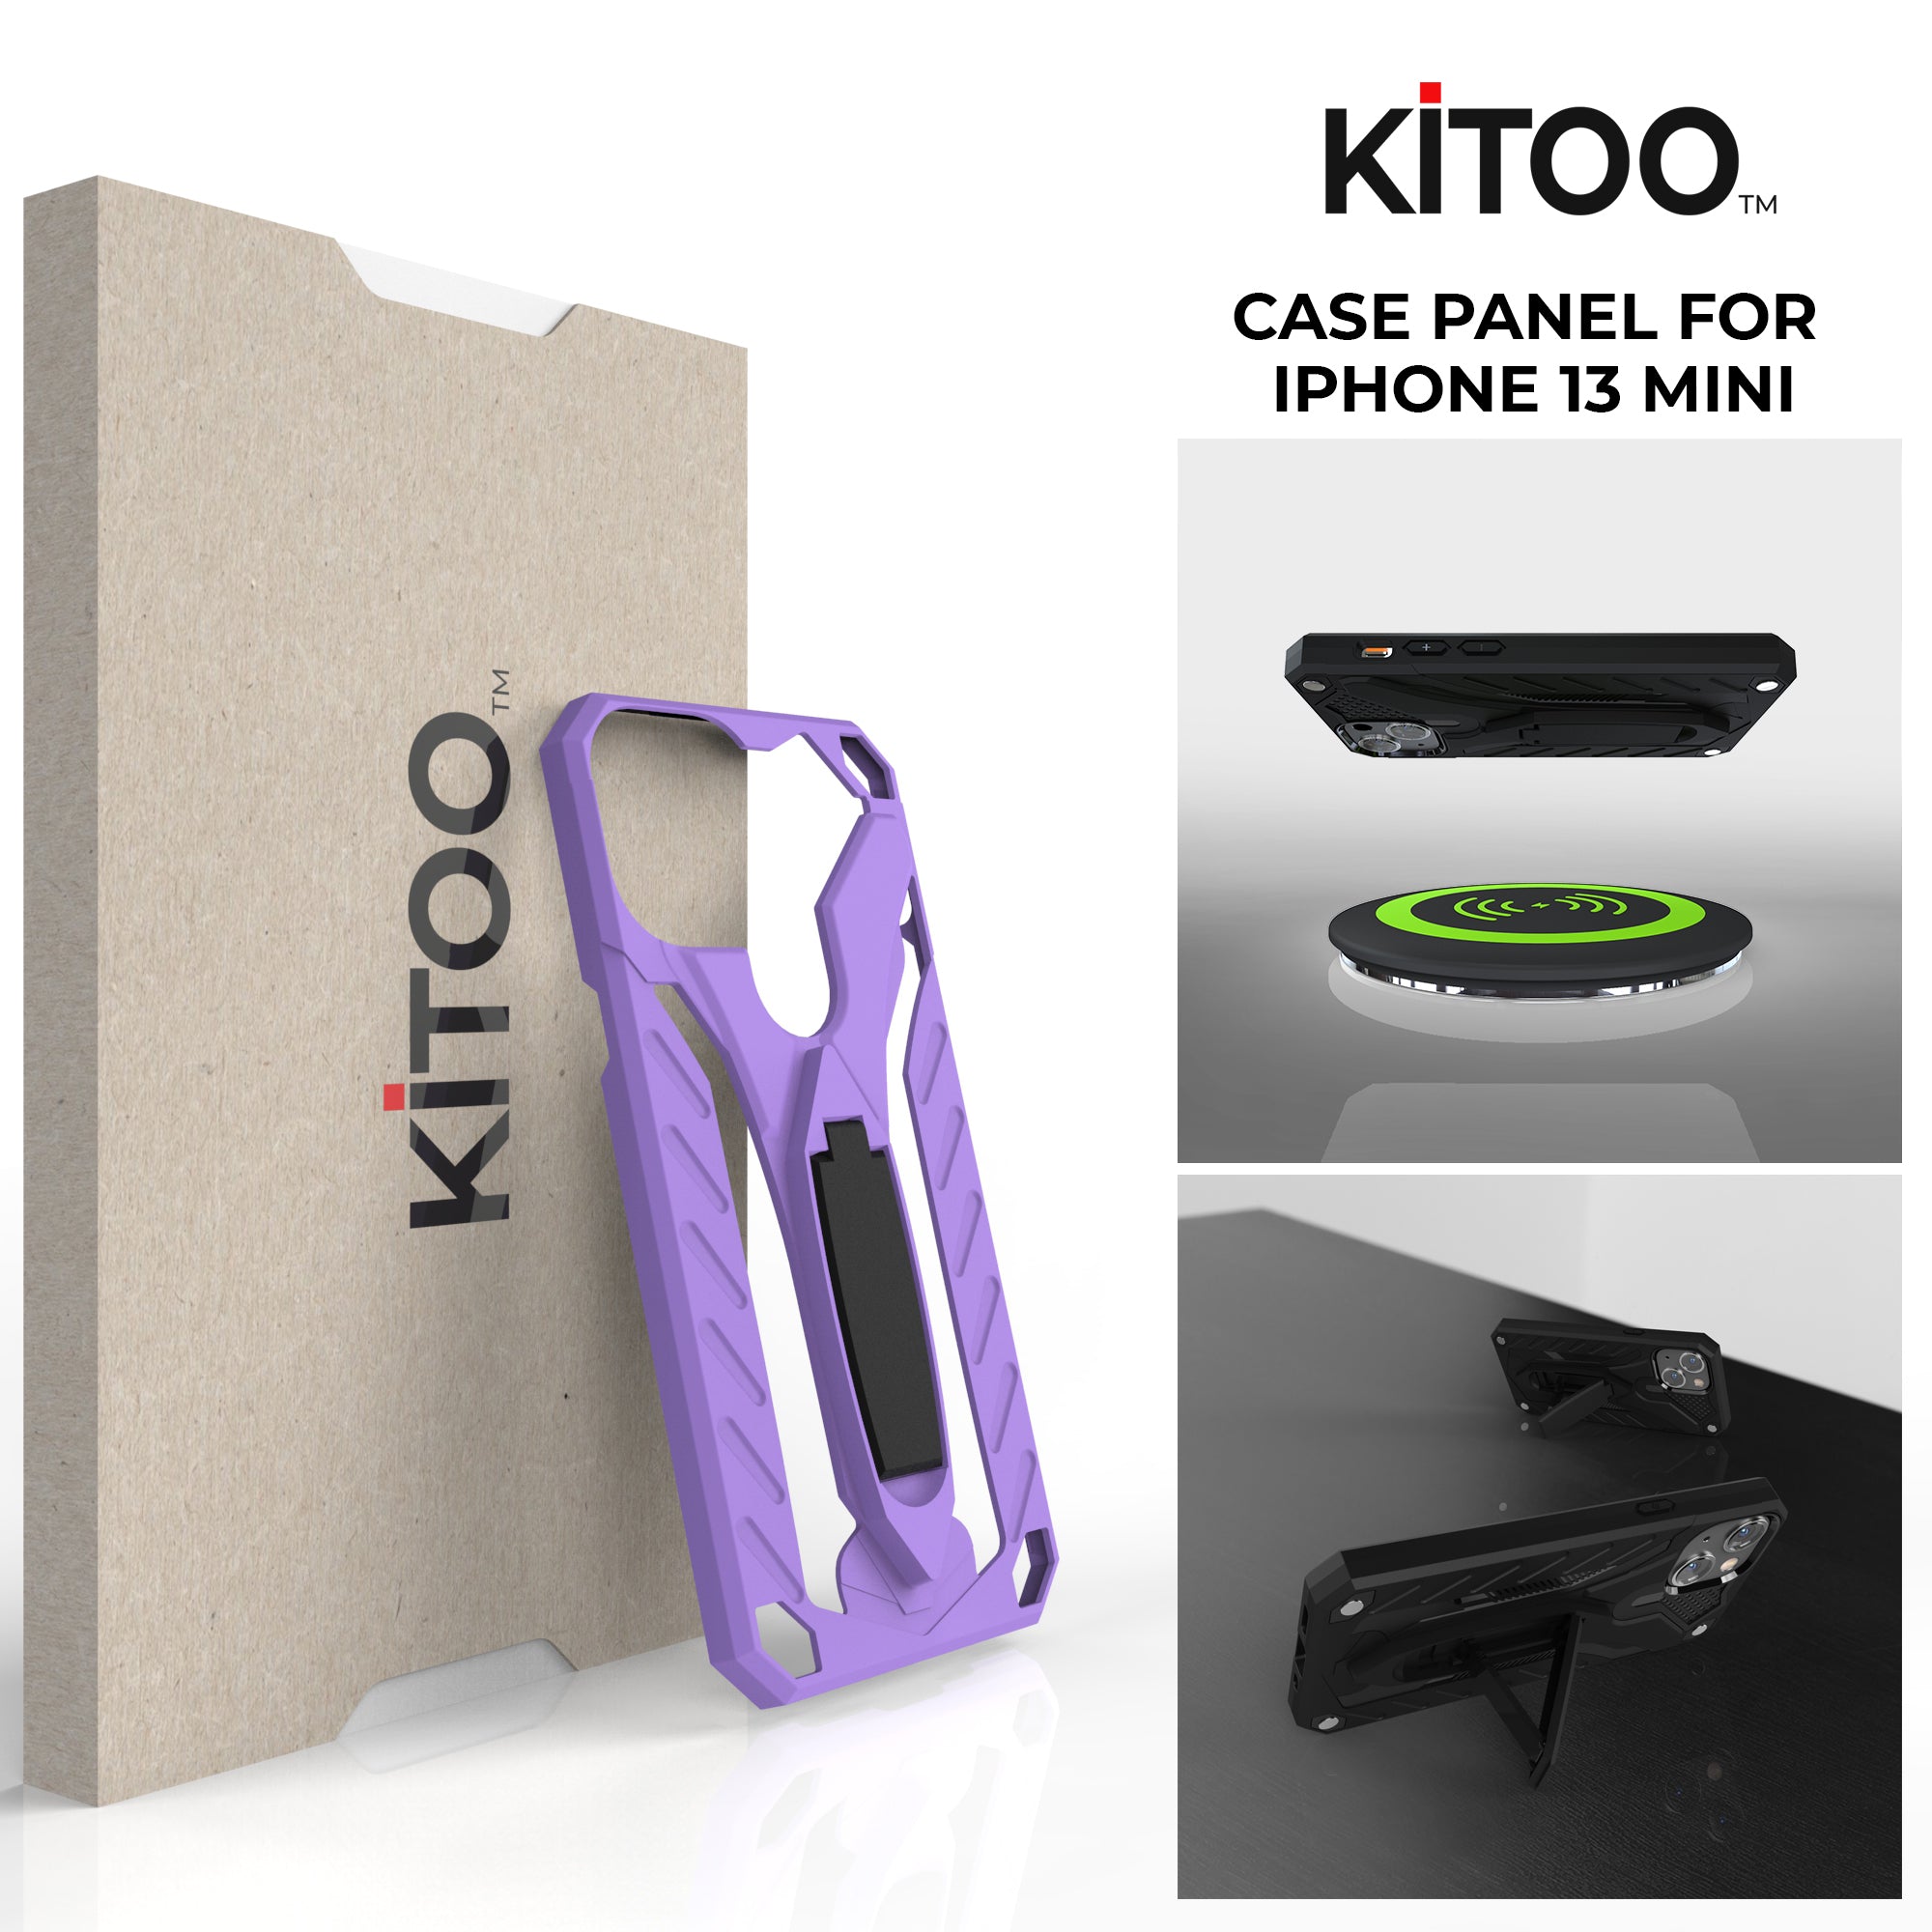 Kitoo Kickstand Panel Designed for iPhone 13 Mini case (Spare Part only) - Purple